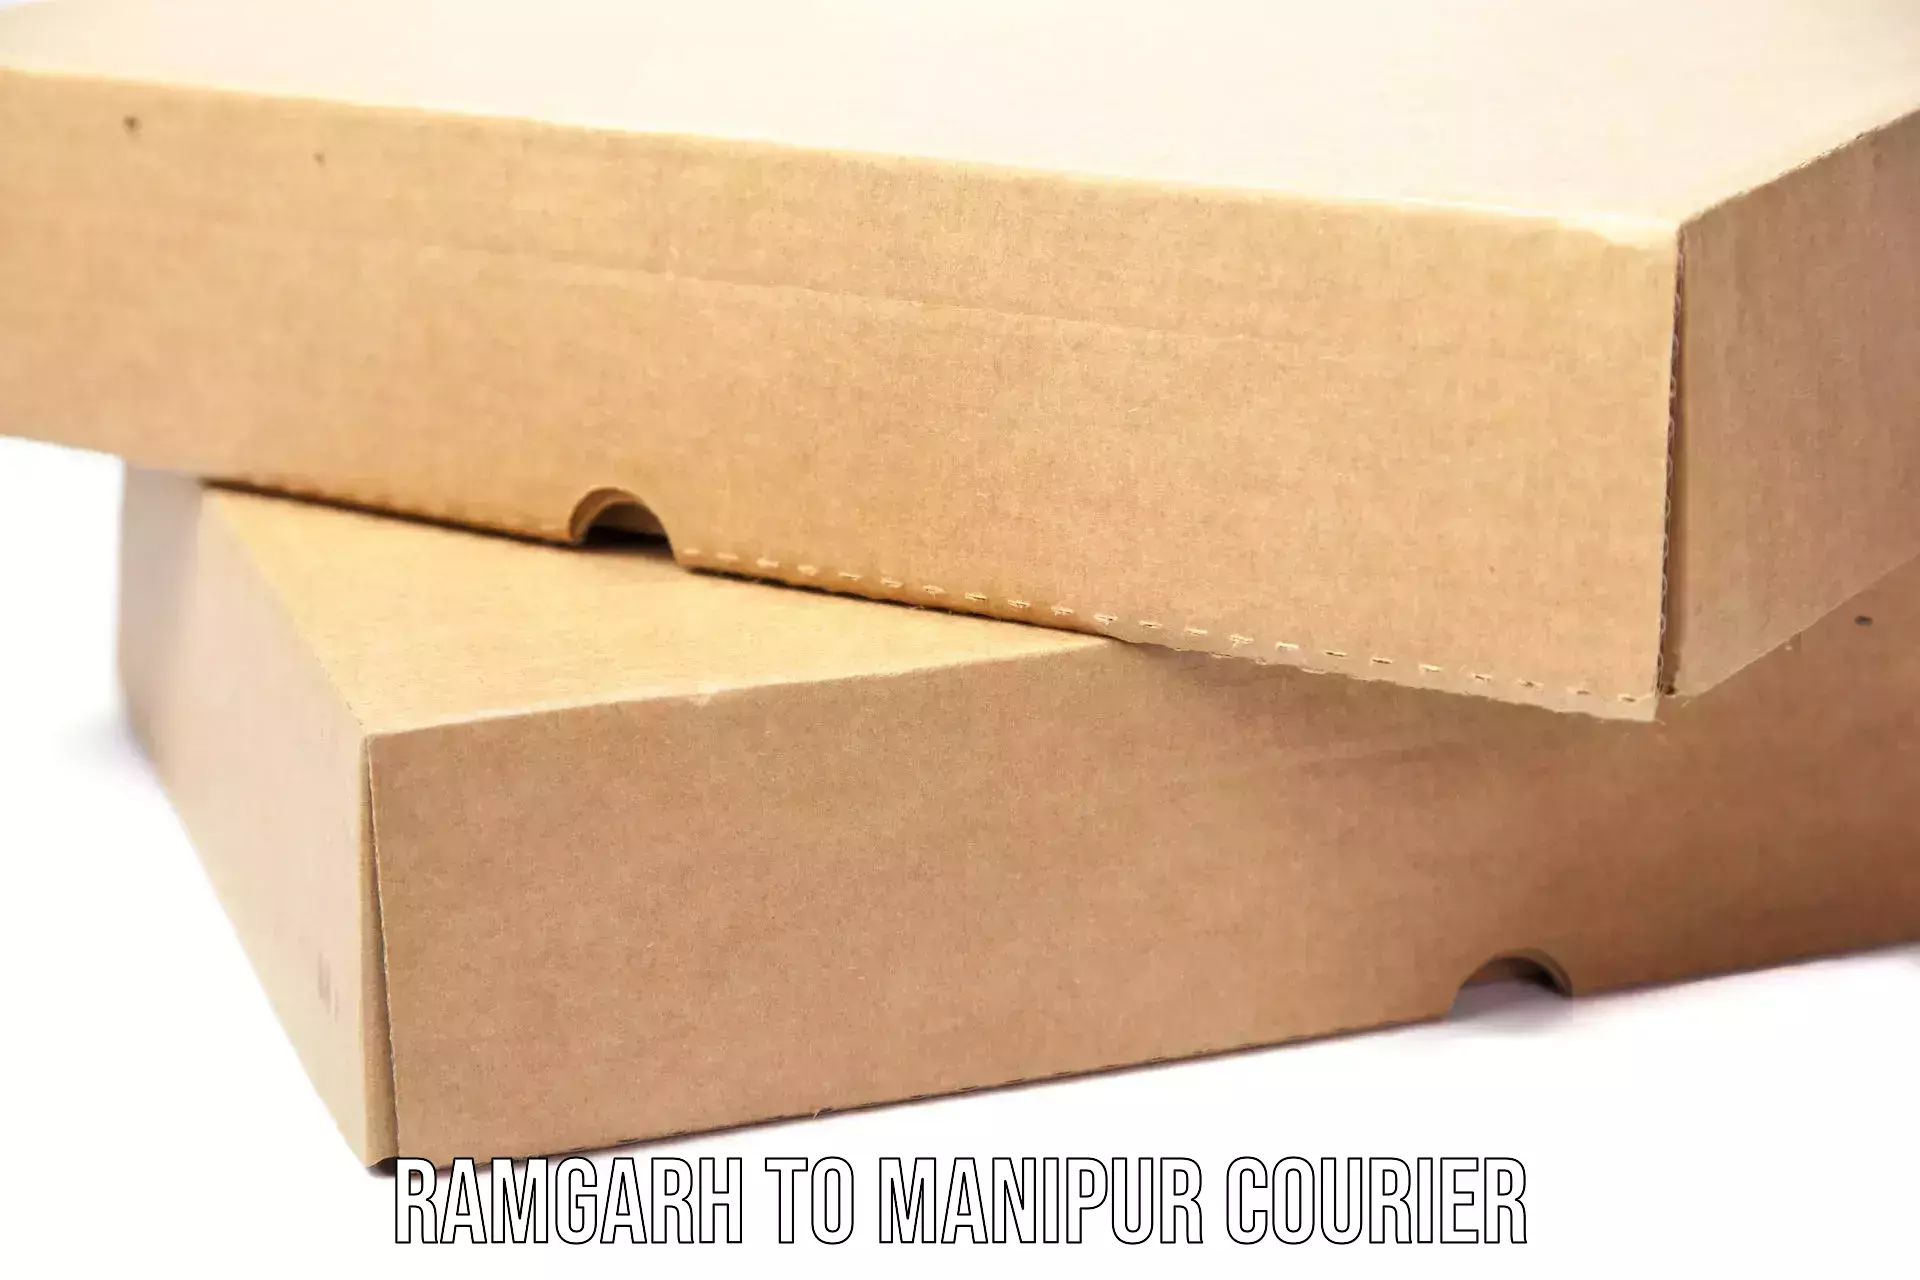 Affordable parcel service Ramgarh to Manipur